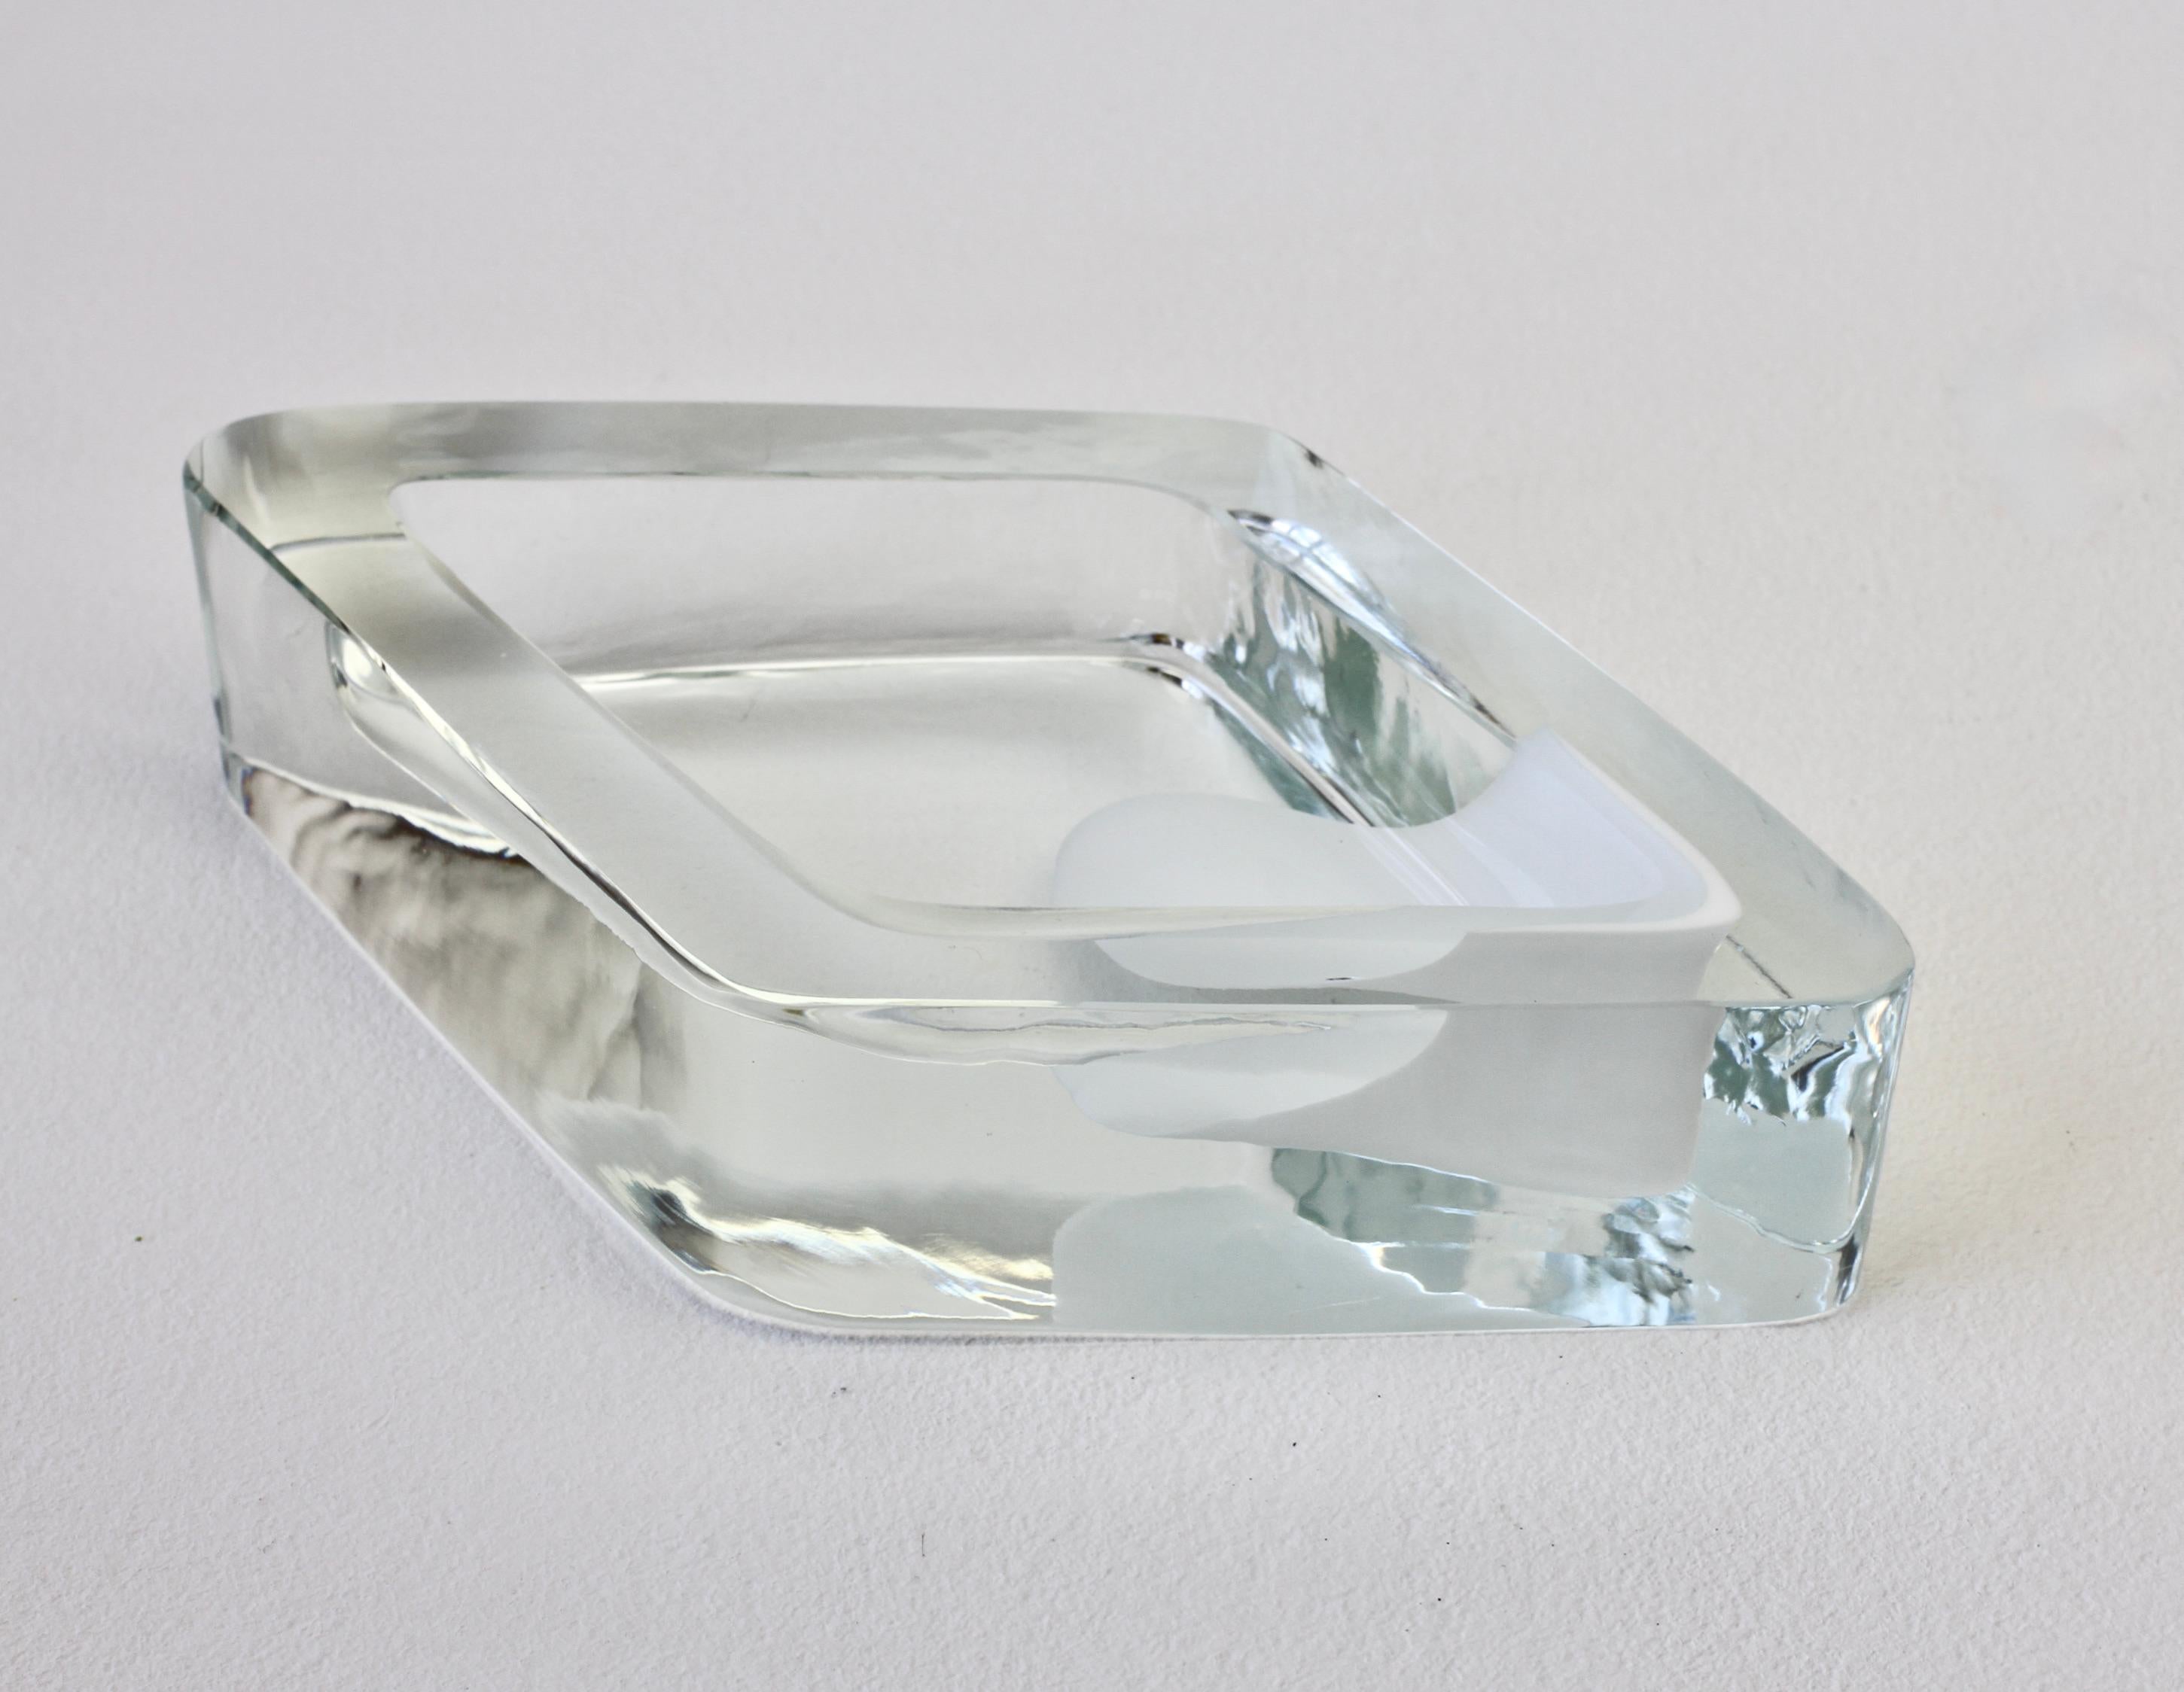 Antonio da Ros for Cenedese signed, large and heavy vintage mid-century modern Italian Murano glass rhombus (diamond) shaped bowl, serving dish or ashtray, circa 1965-1975. Large and heavy piece of glass features an geometric design with clear glass